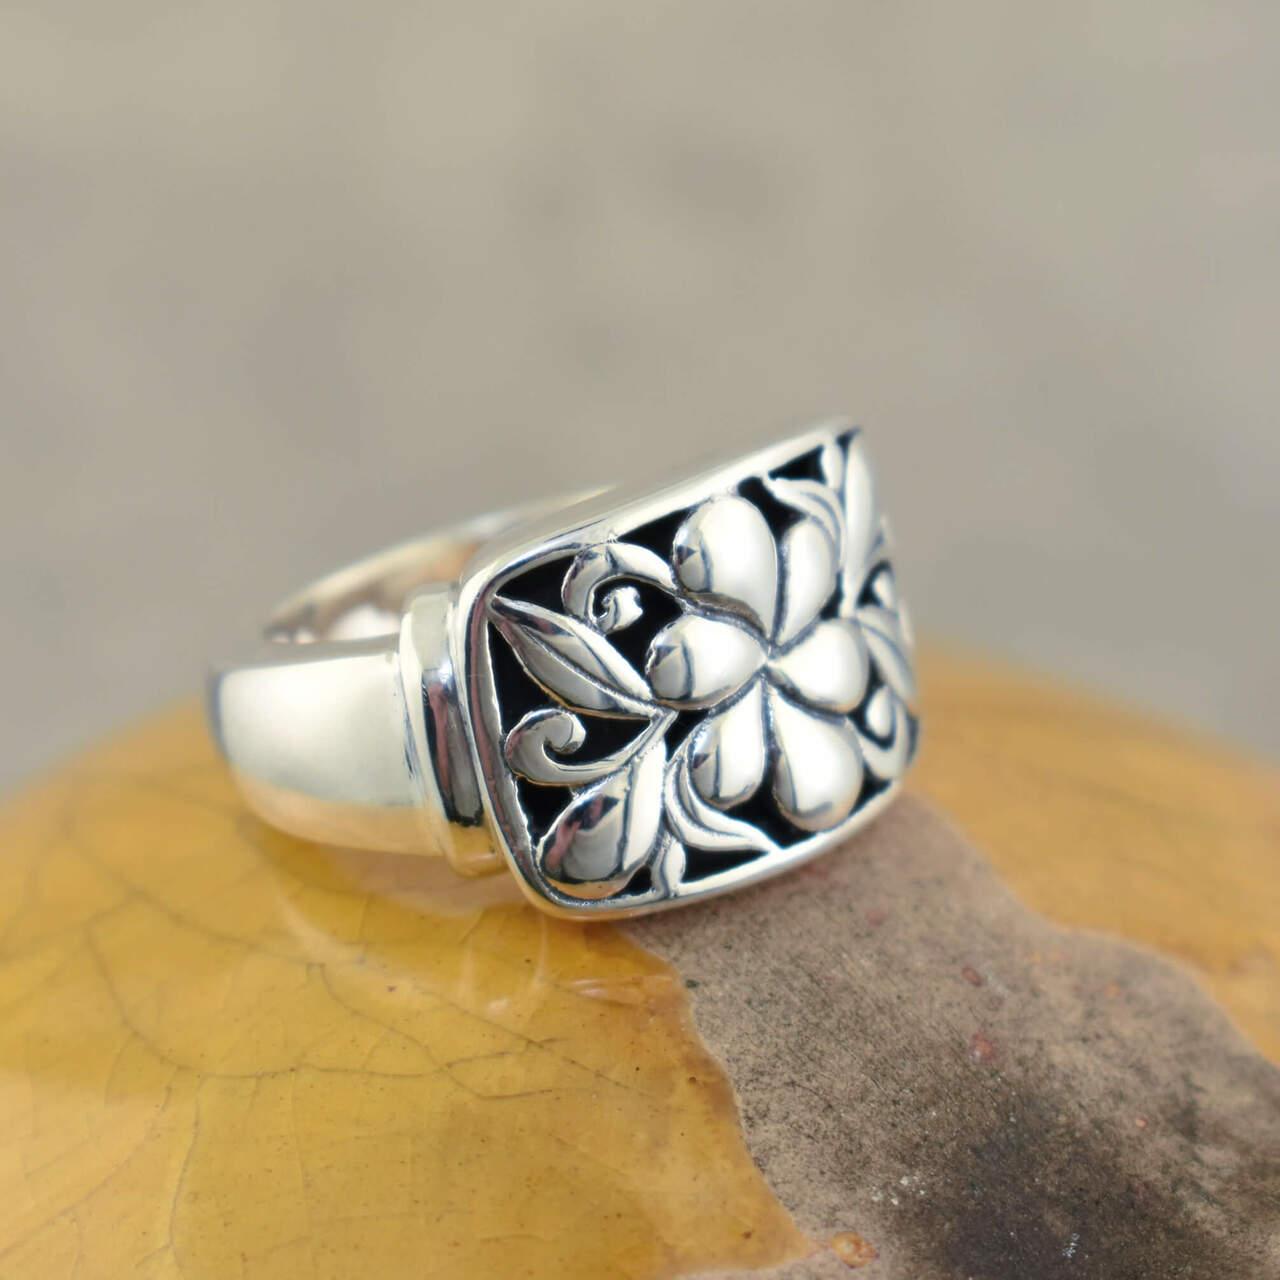 Handcrafted sterling silver Venice Ring